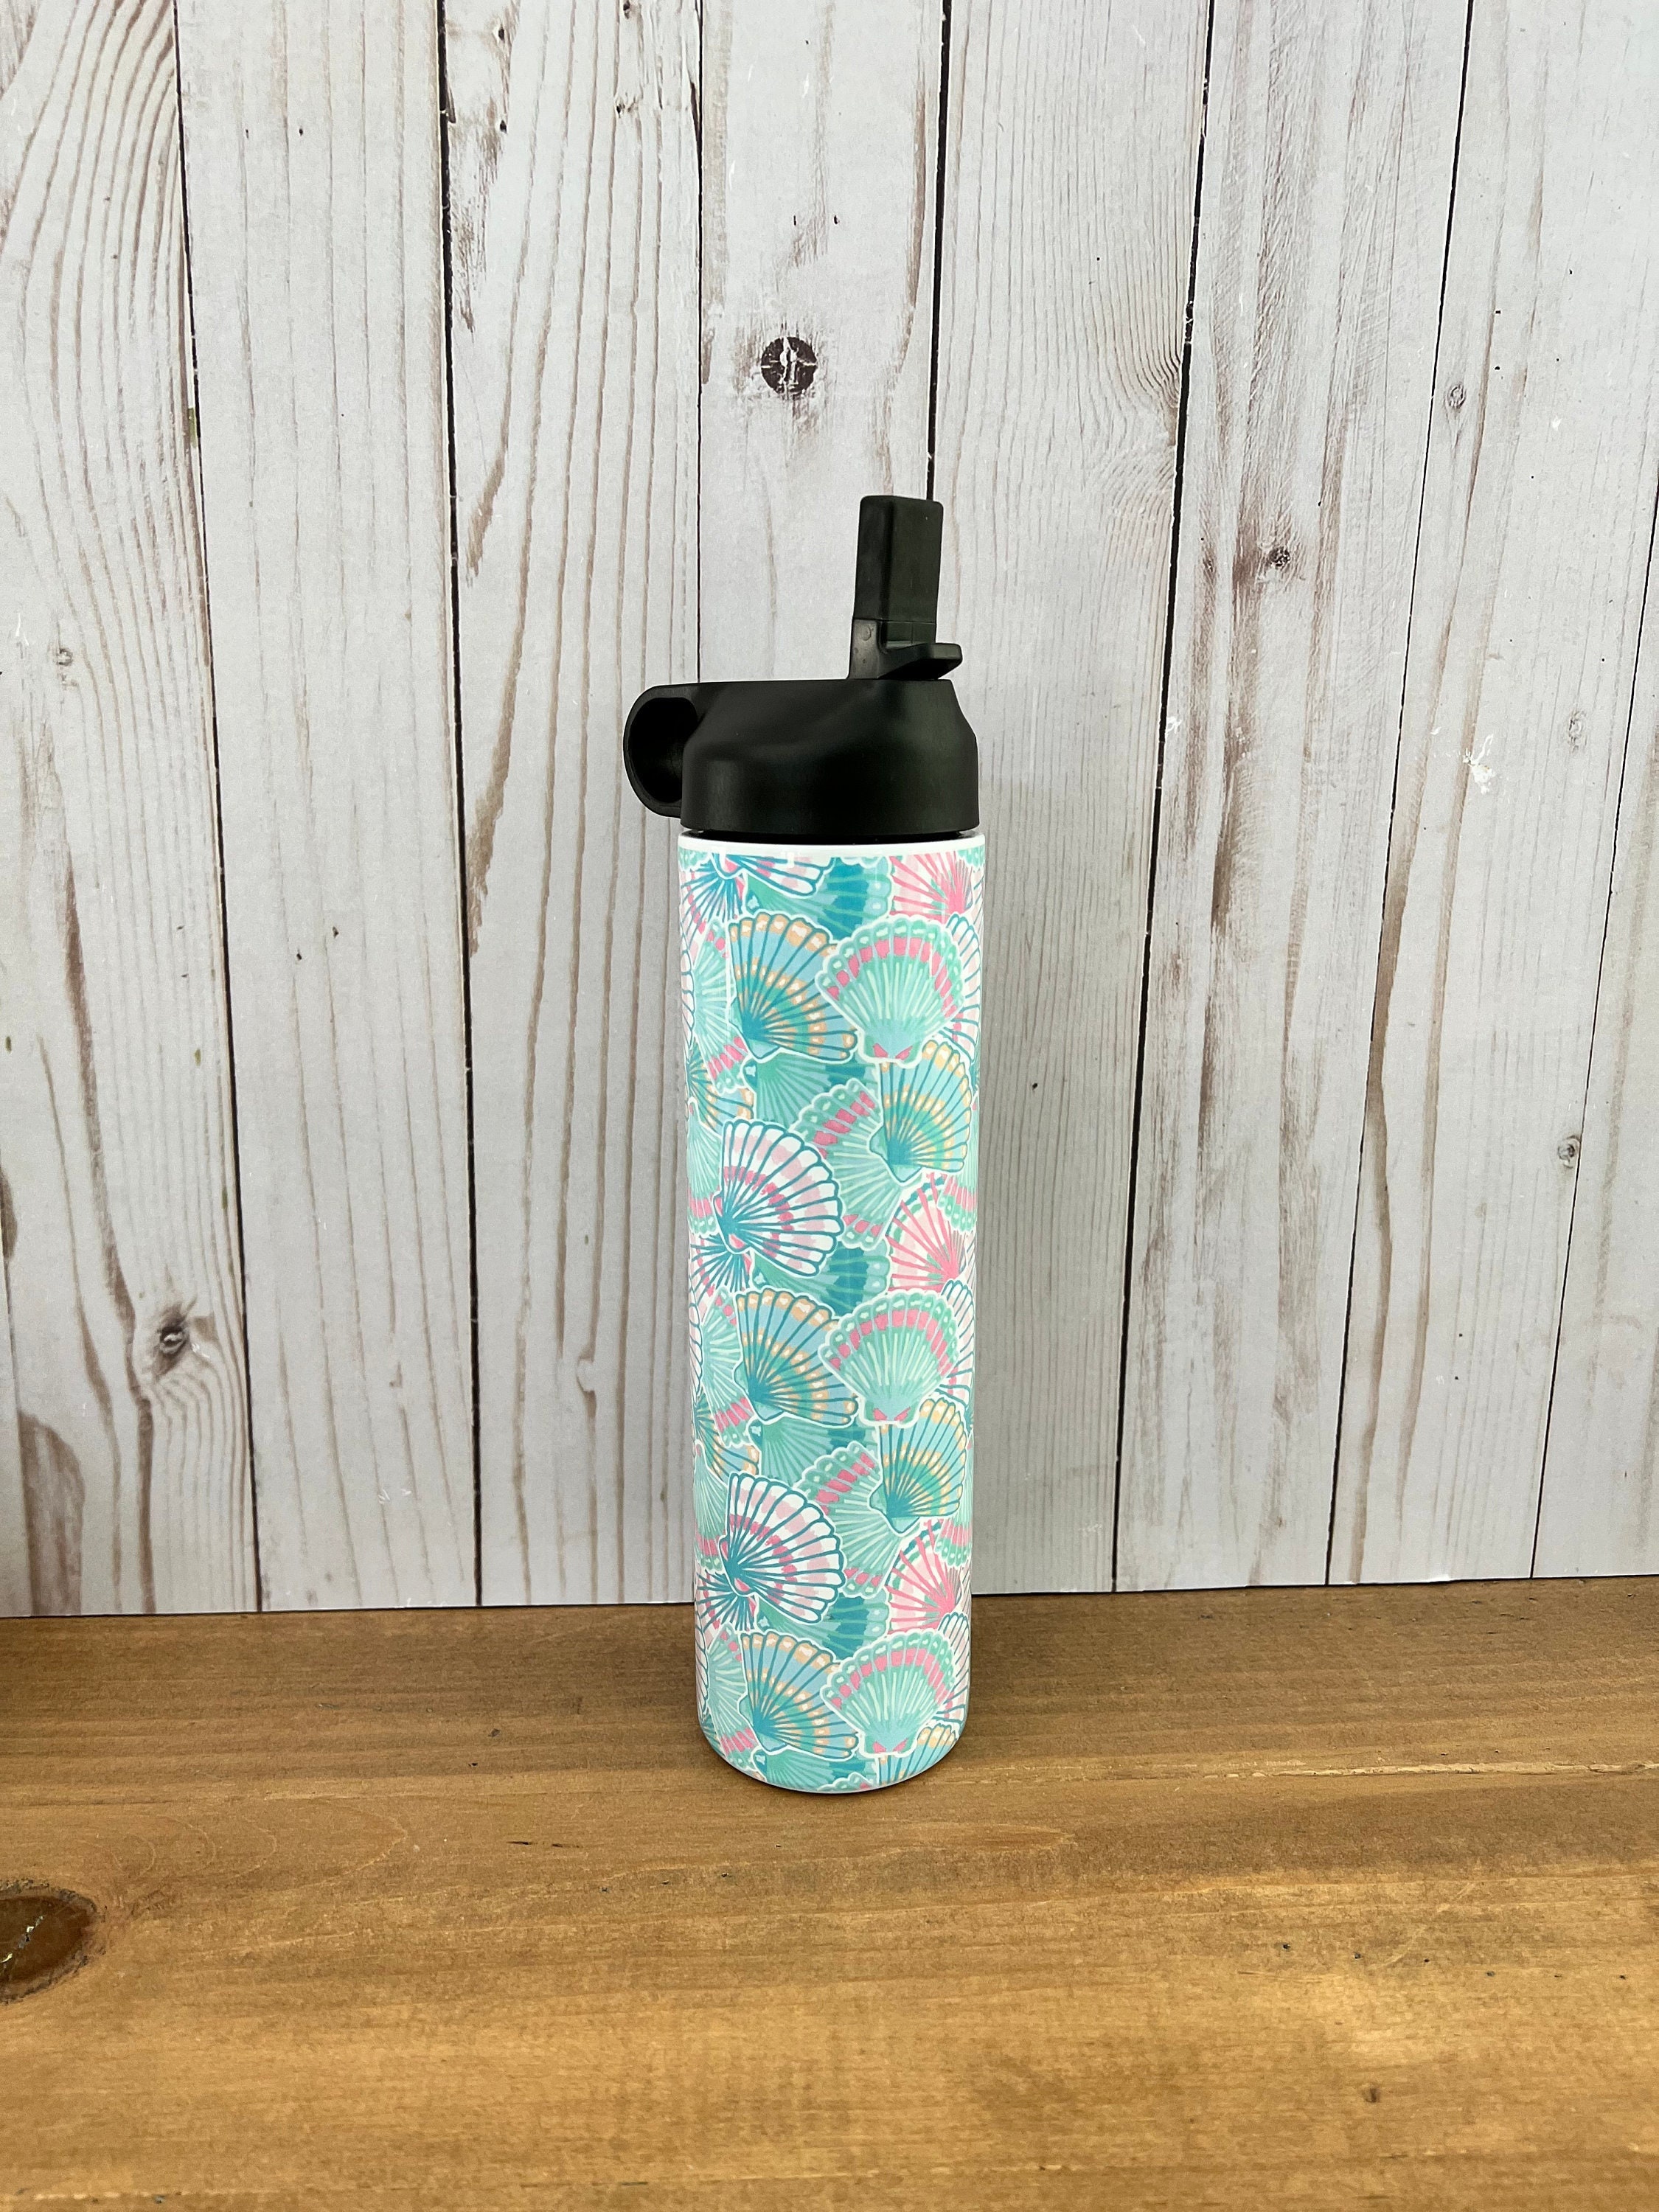 P is for Preppy Y Water Bottle by P is for Preppy